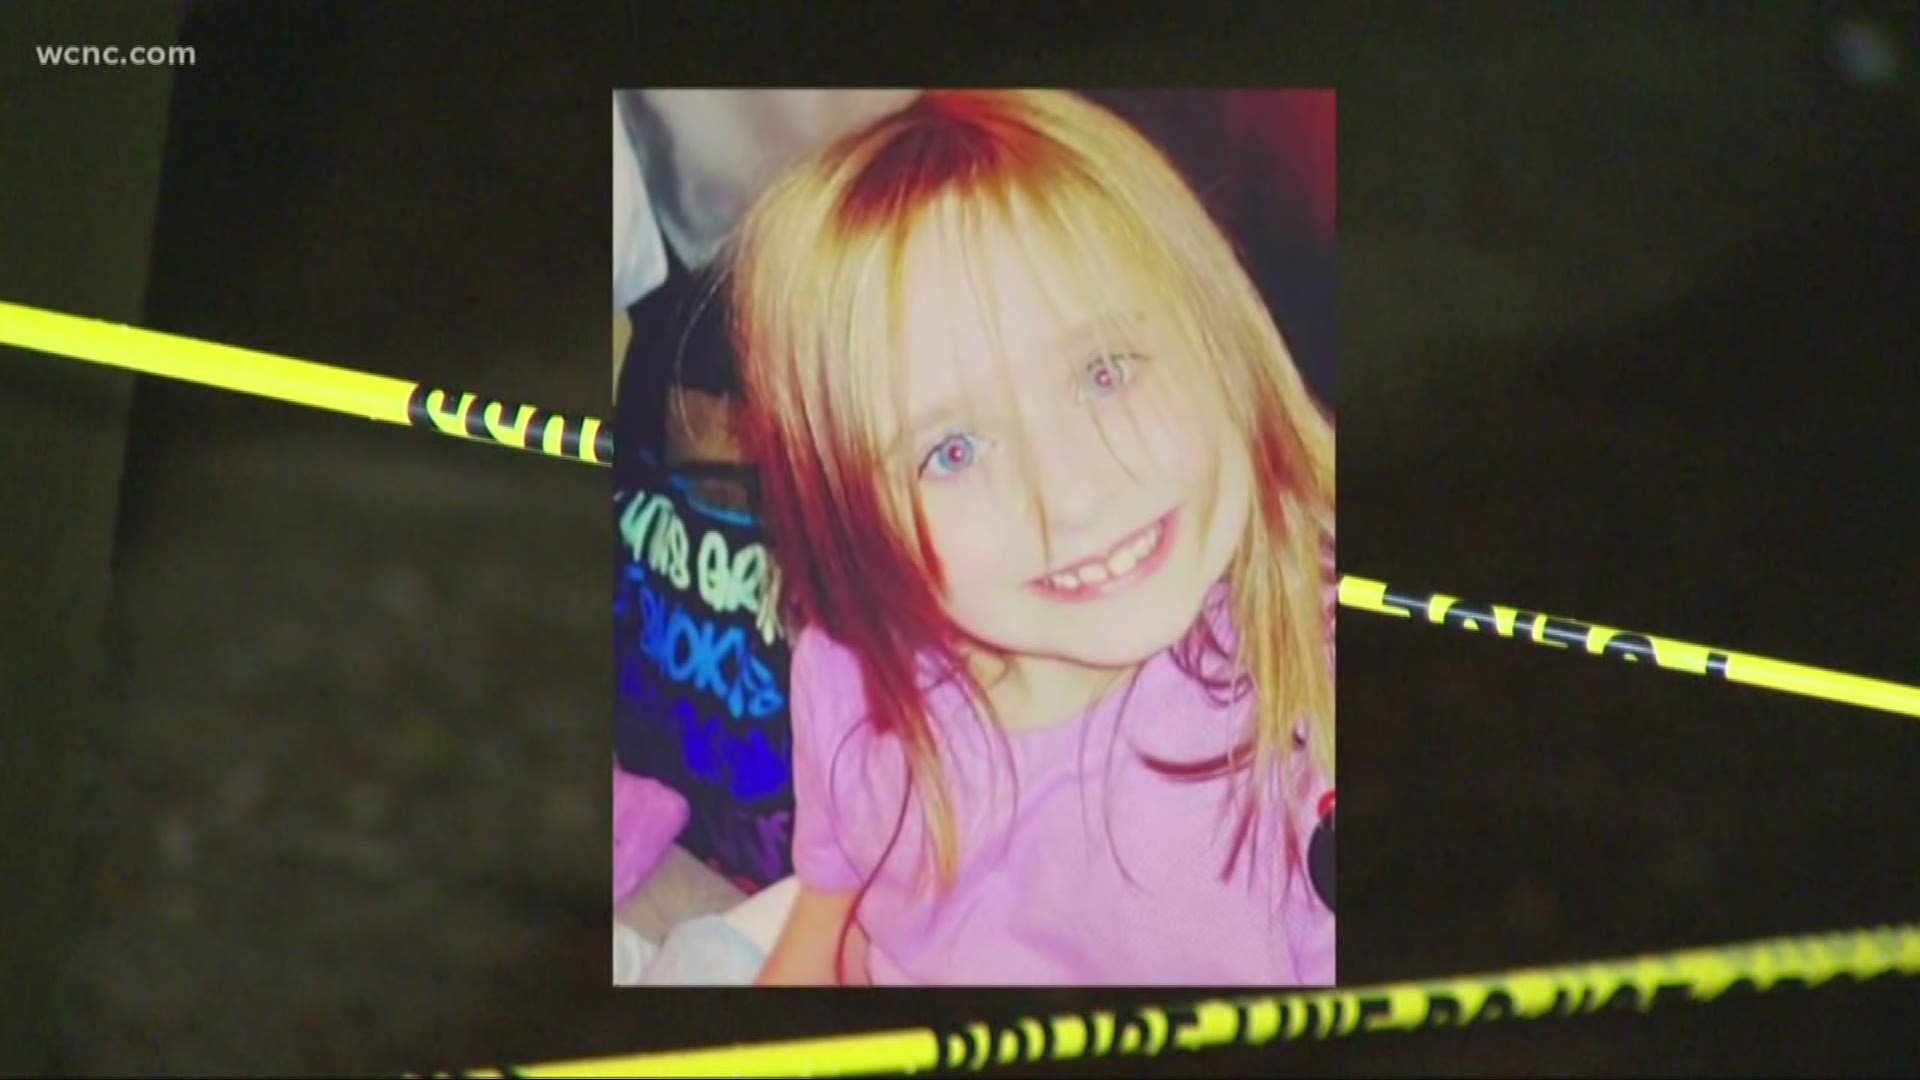 Days after she went missing, the body of 6-year-old Faye Swetlik was found in her neighborhood. During the search, an unknown male's body was also found.